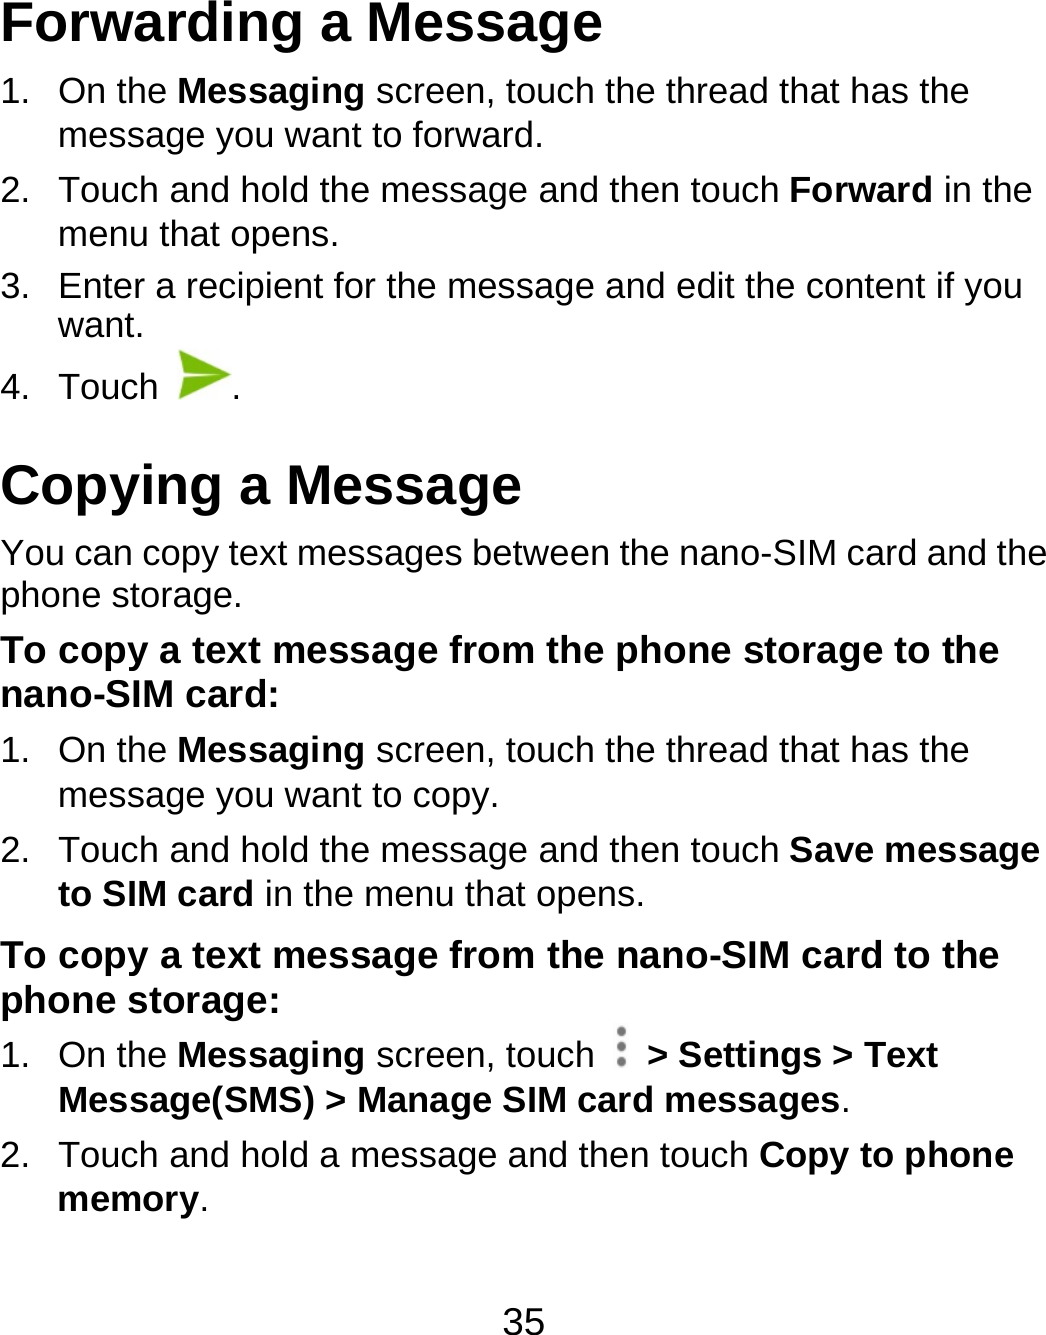 35 Forwarding a Message 1. On the Messaging screen, touch the thread that has the message you want to forward. 2.  Touch and hold the message and then touch Forward in the menu that opens. 3.  Enter a recipient for the message and edit the content if you want. 4. Touch  . Copying a Message You can copy text messages between the nano-SIM card and the phone storage. To copy a text message from the phone storage to the nano-SIM card: 1. On the Messaging screen, touch the thread that has the message you want to copy. 2.  Touch and hold the message and then touch Save message to SIM card in the menu that opens. To copy a text message from the nano-SIM card to the phone storage: 1. On the Messaging screen, touch    &gt; Settings &gt; Text Message(SMS) &gt; Manage SIM card messages. 2.  Touch and hold a message and then touch Copy to phone memory. 